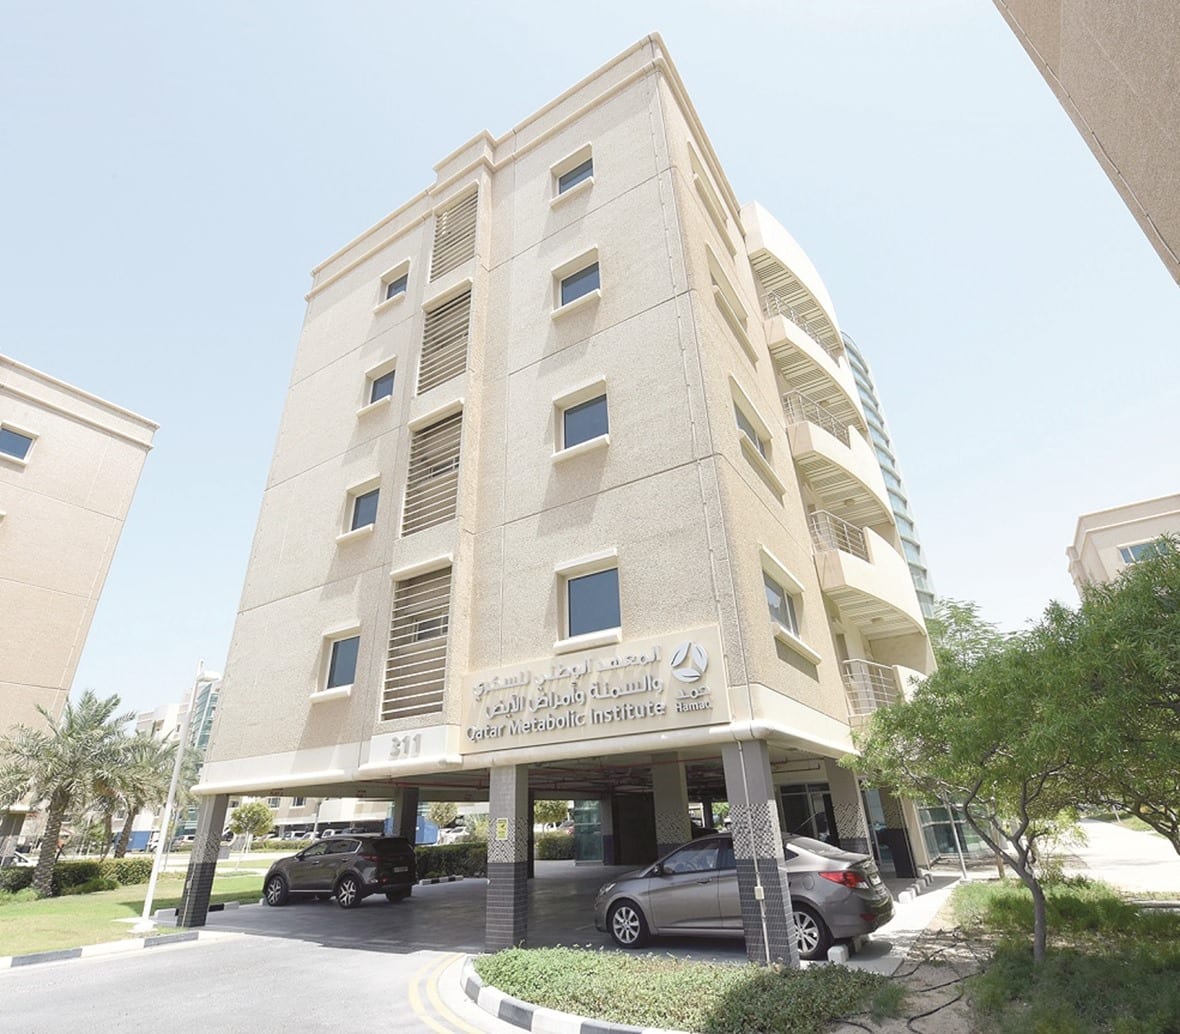 Over 7,800 patients treated at Qatar Metabolic Institute since its opening